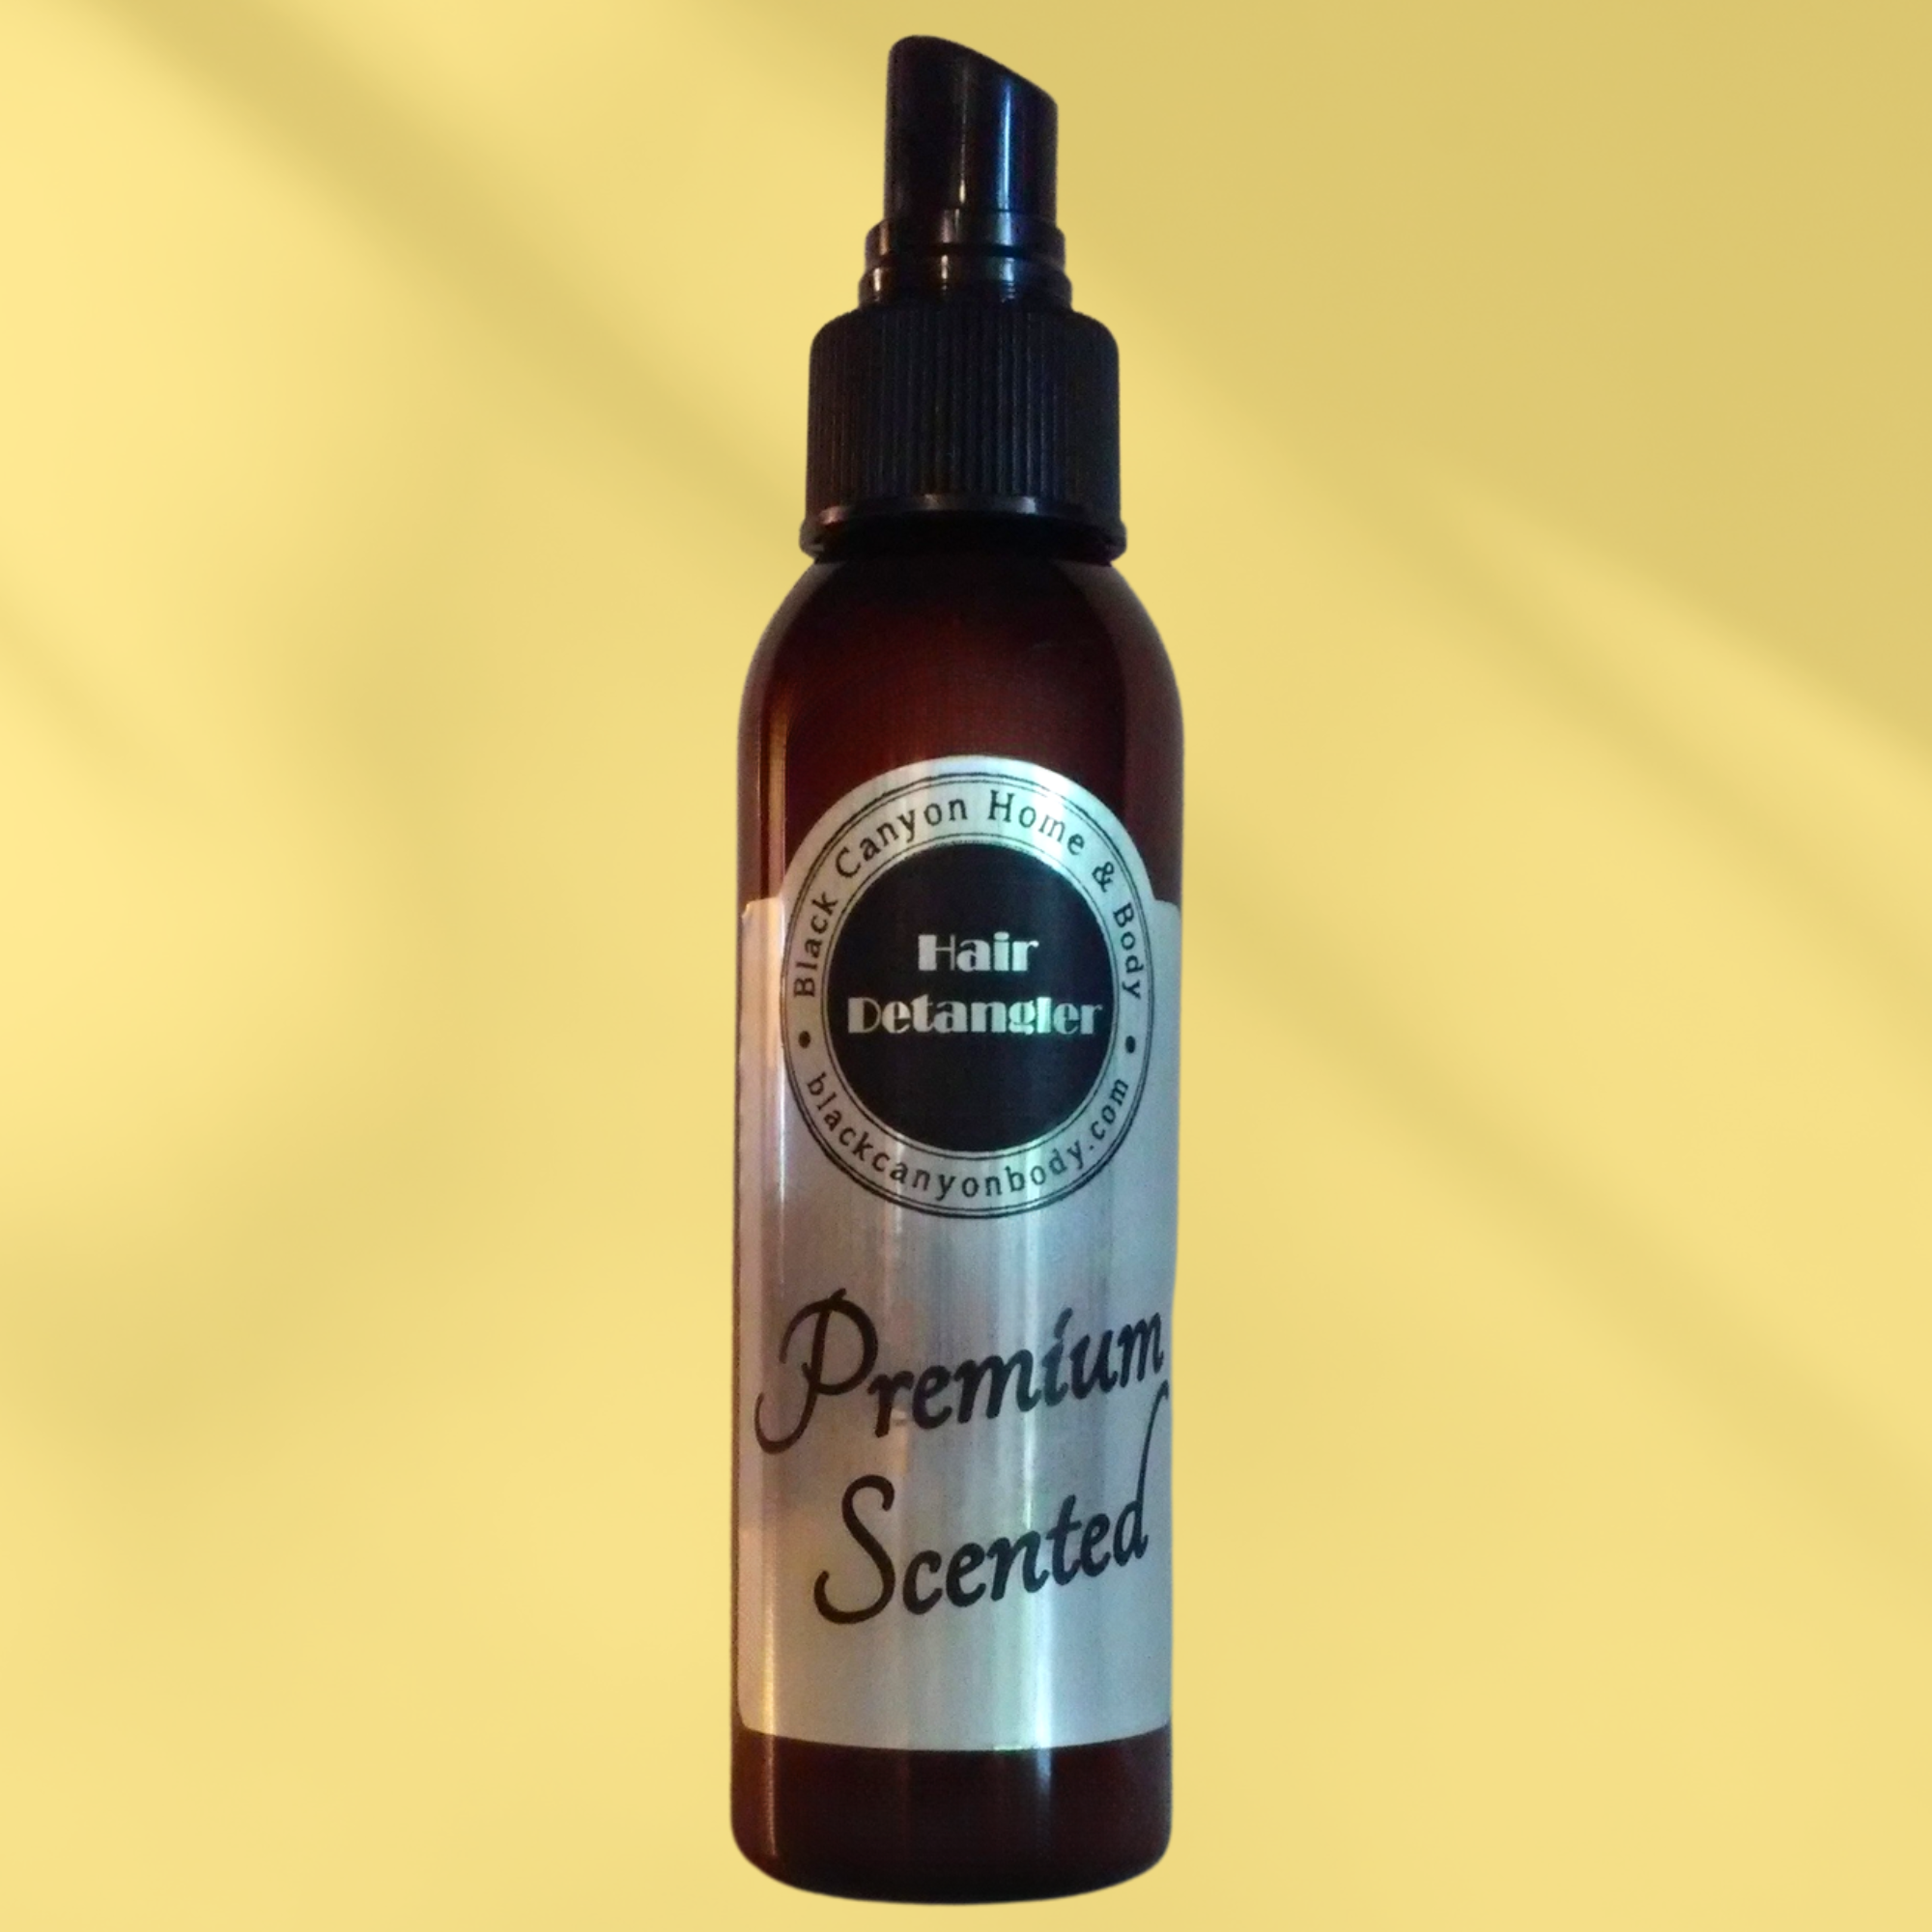 Black Canyon Acai & Mangosteen Scented Hair Detangler Spray with Olive Oil